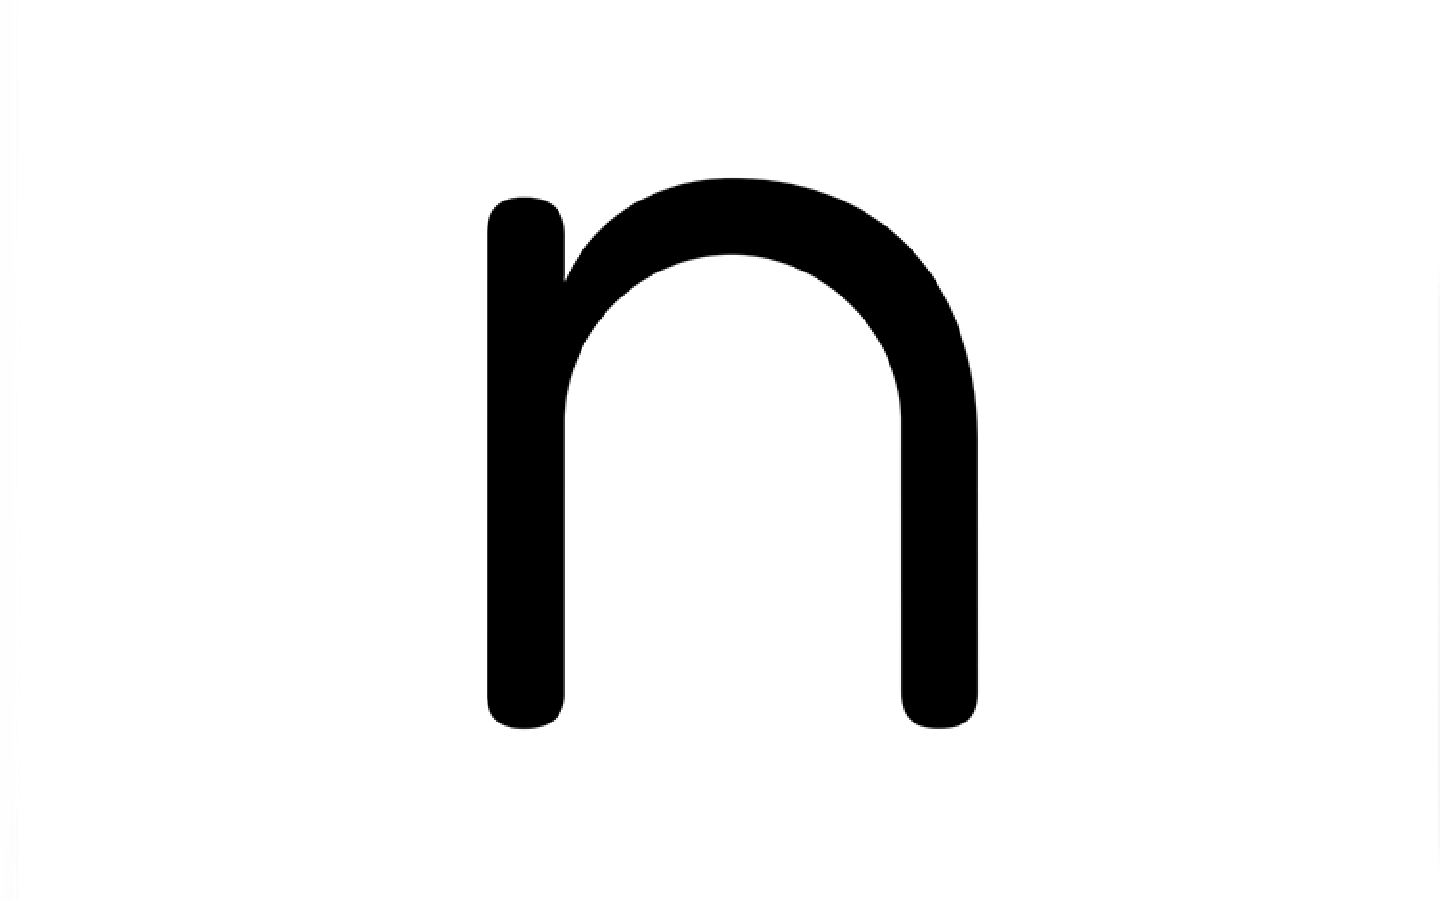 Black lowercase letter 'n' in a bold sans-serif font, representing an online Language Arts curriculum, on a white background.